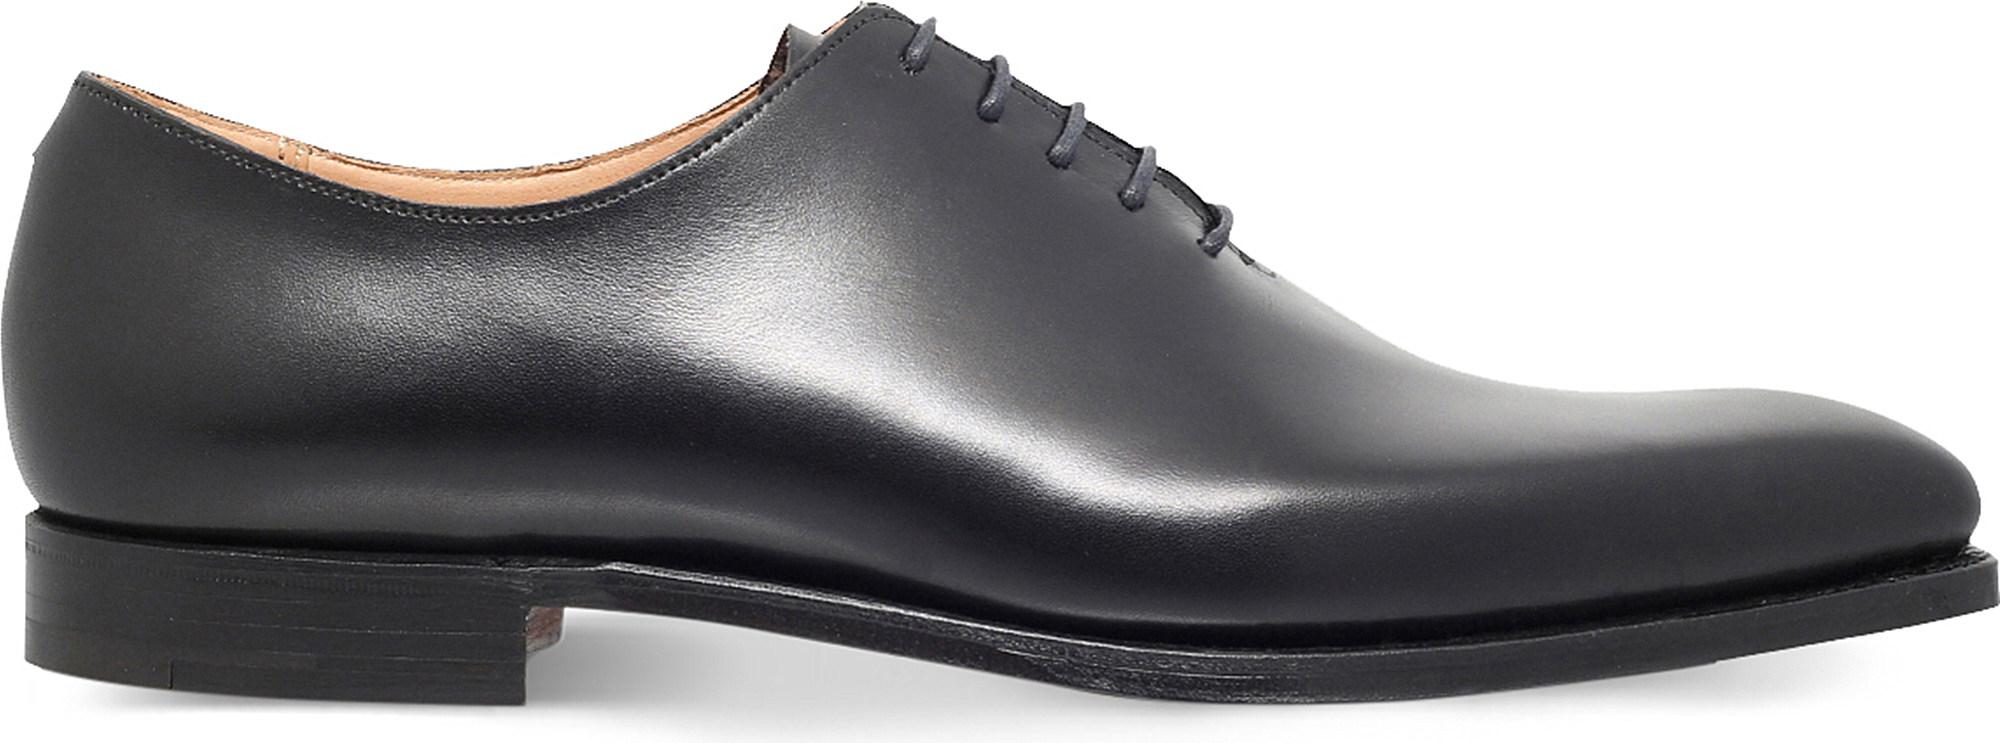 Lyst - Crockett And Jones Alex Leather Oxford Shoes in Black for Men